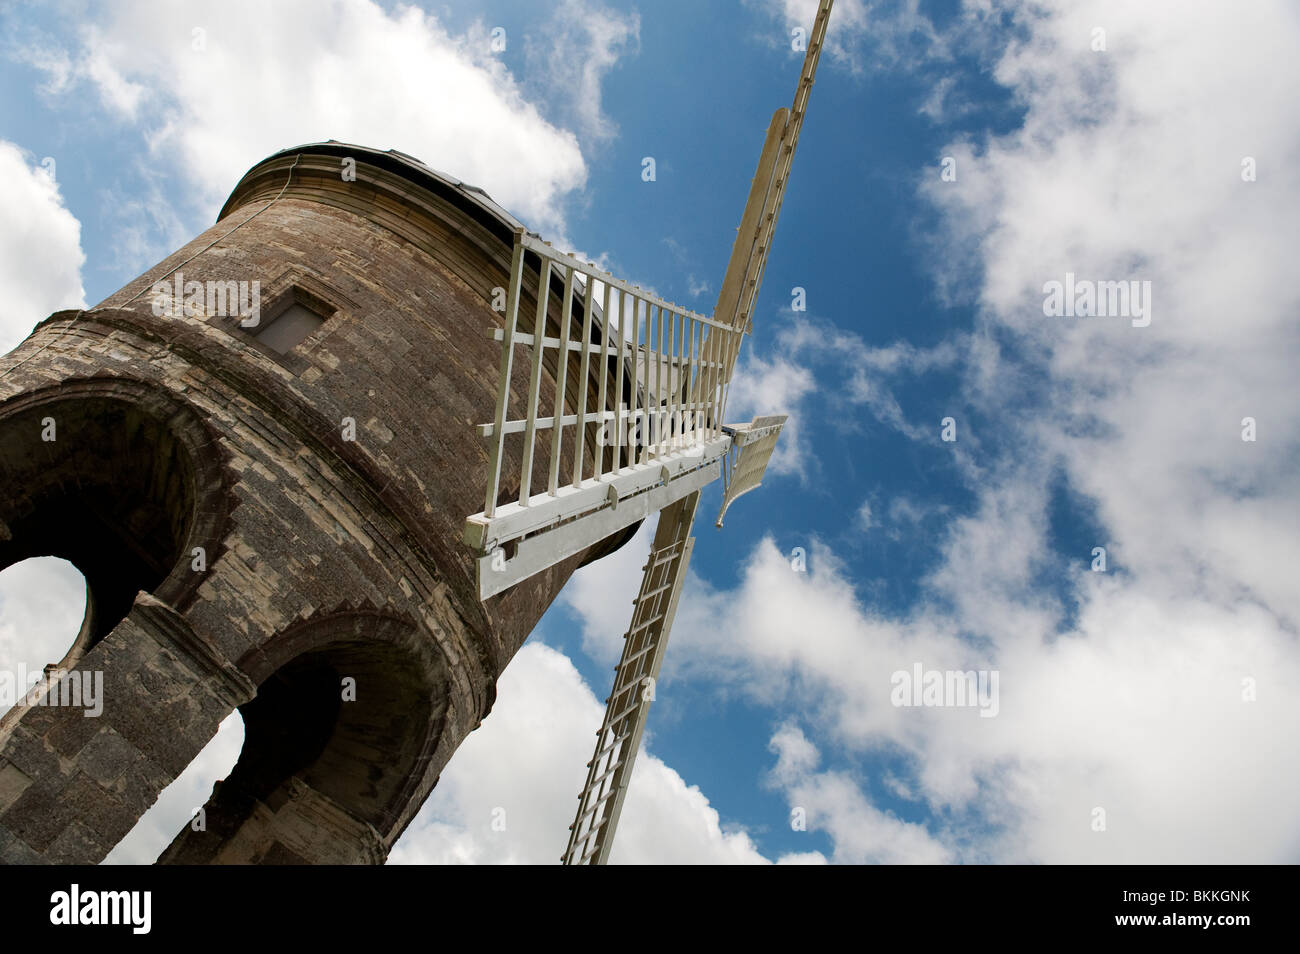 Chesterton Windmill in the Warwickshire countryside, England Stock Photo